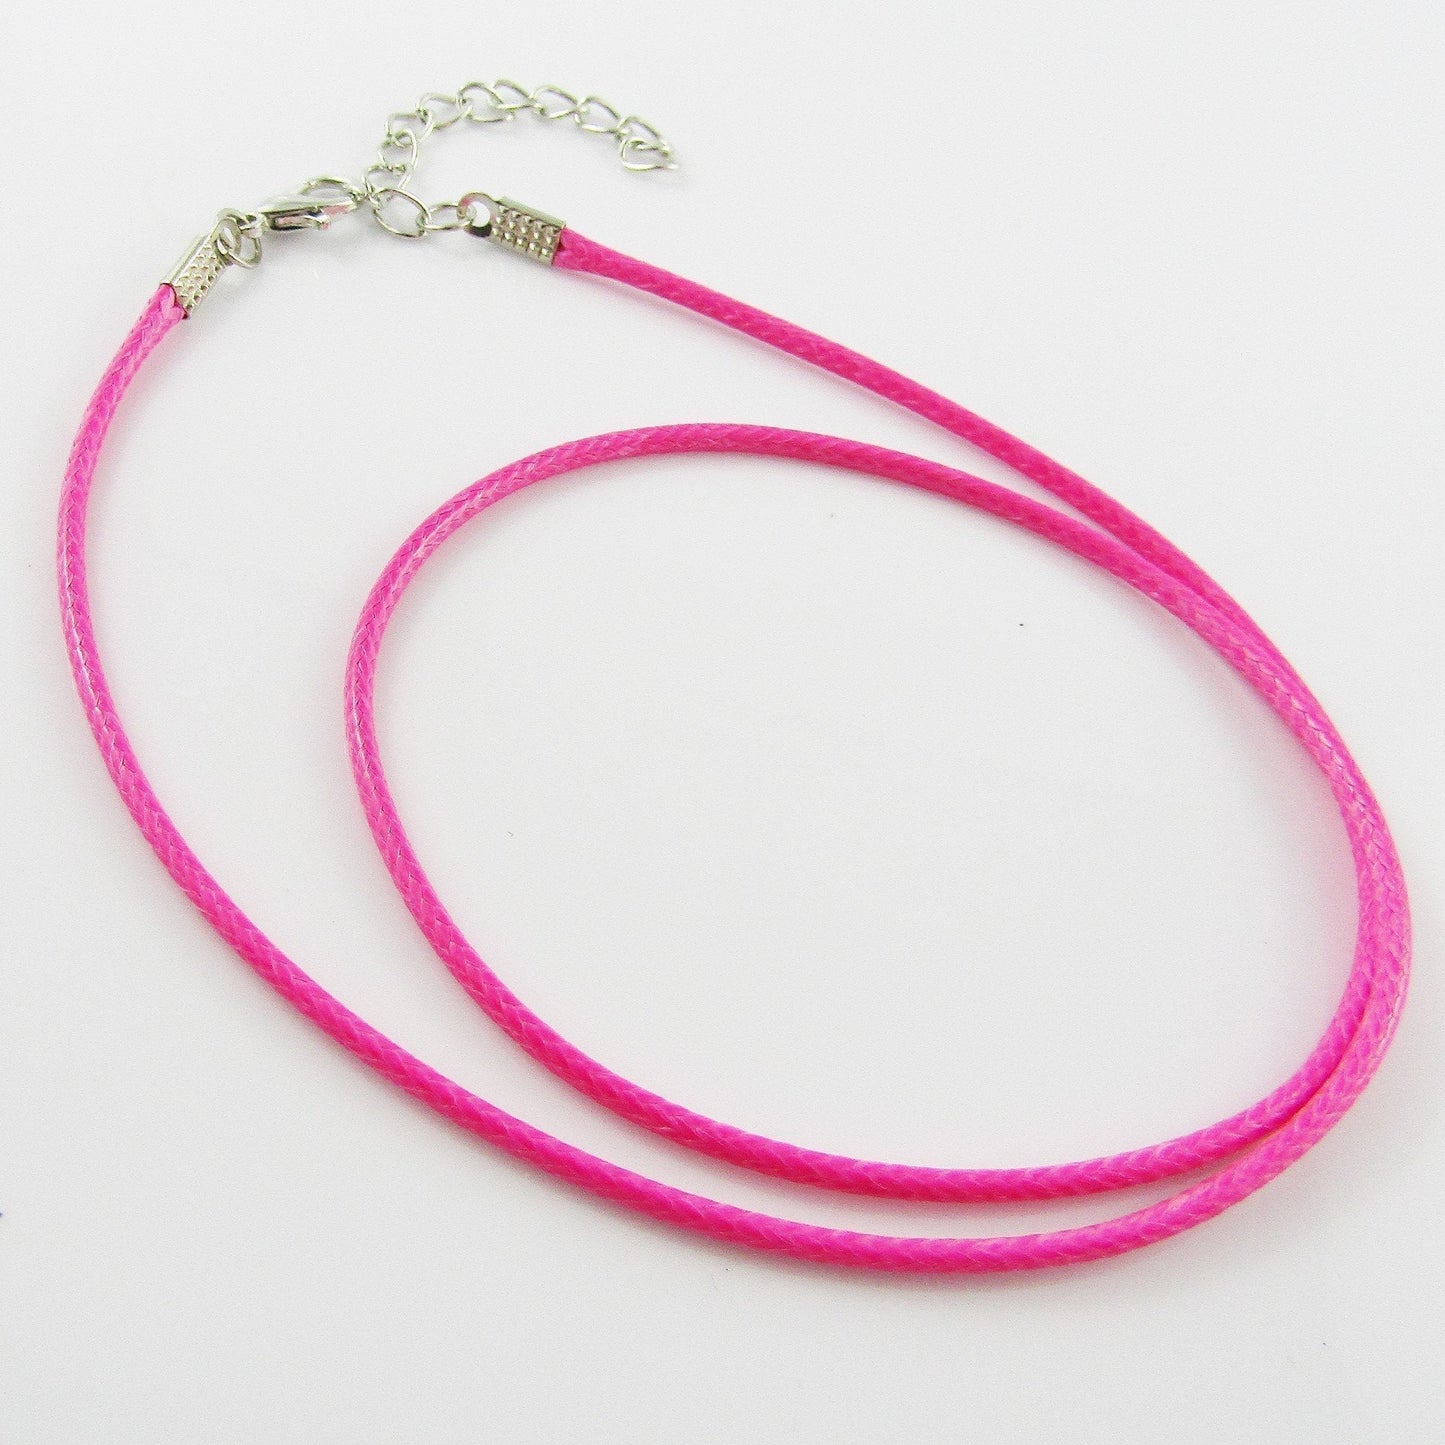 Bulk Pack 10pcs 2mm Hot Pink Cord Necklace 44cm with 5cm Extender